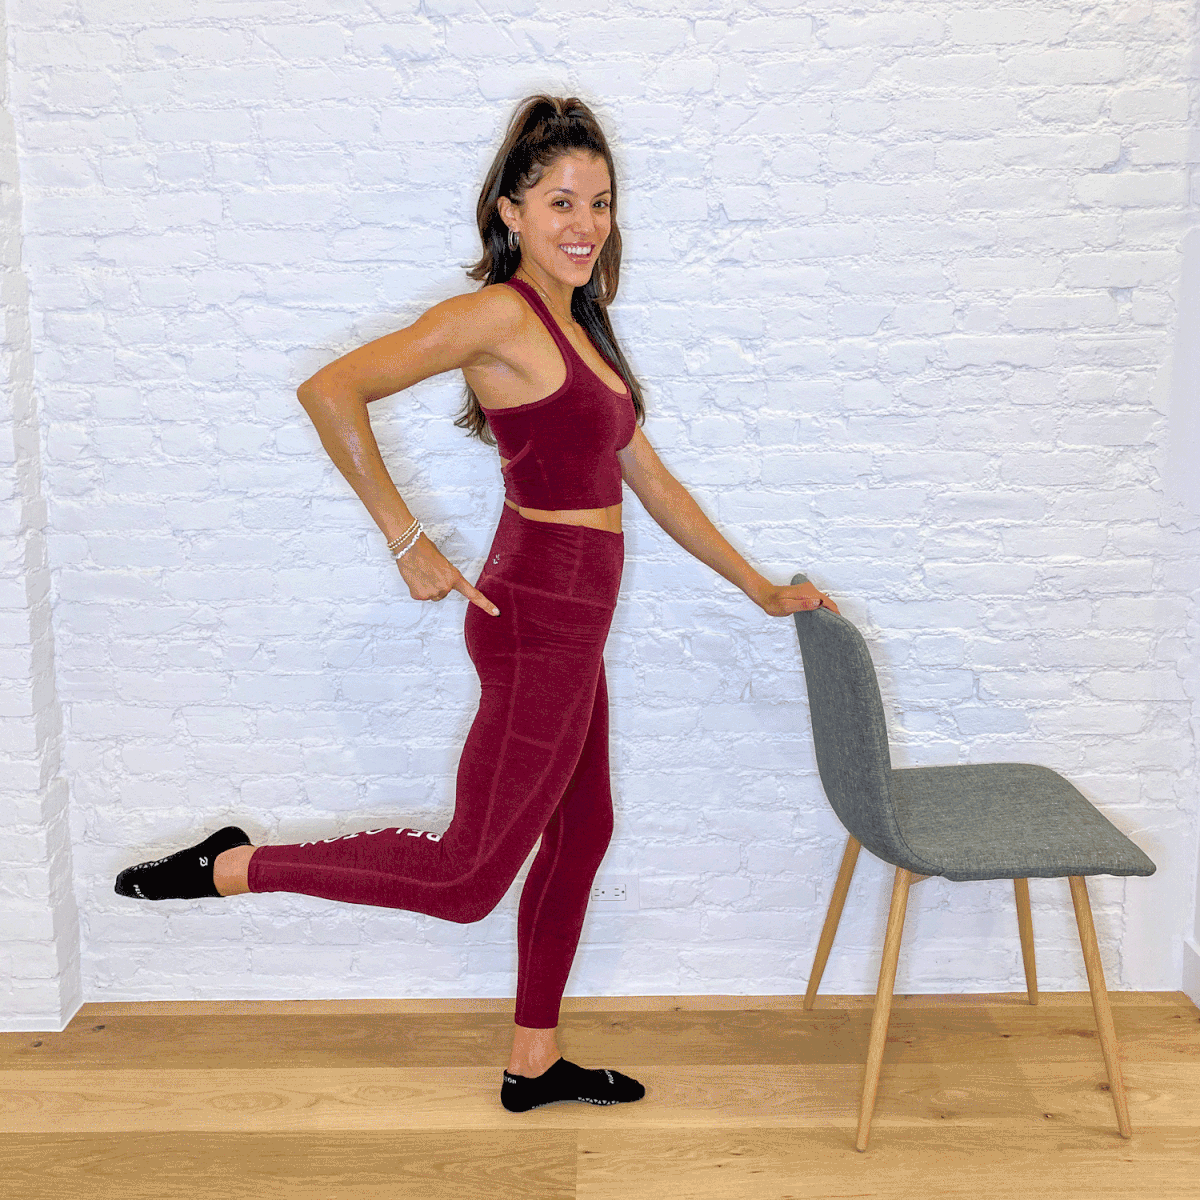 The Easy At-Home Barre Workout from Peloton You Can Do In 10 Minute